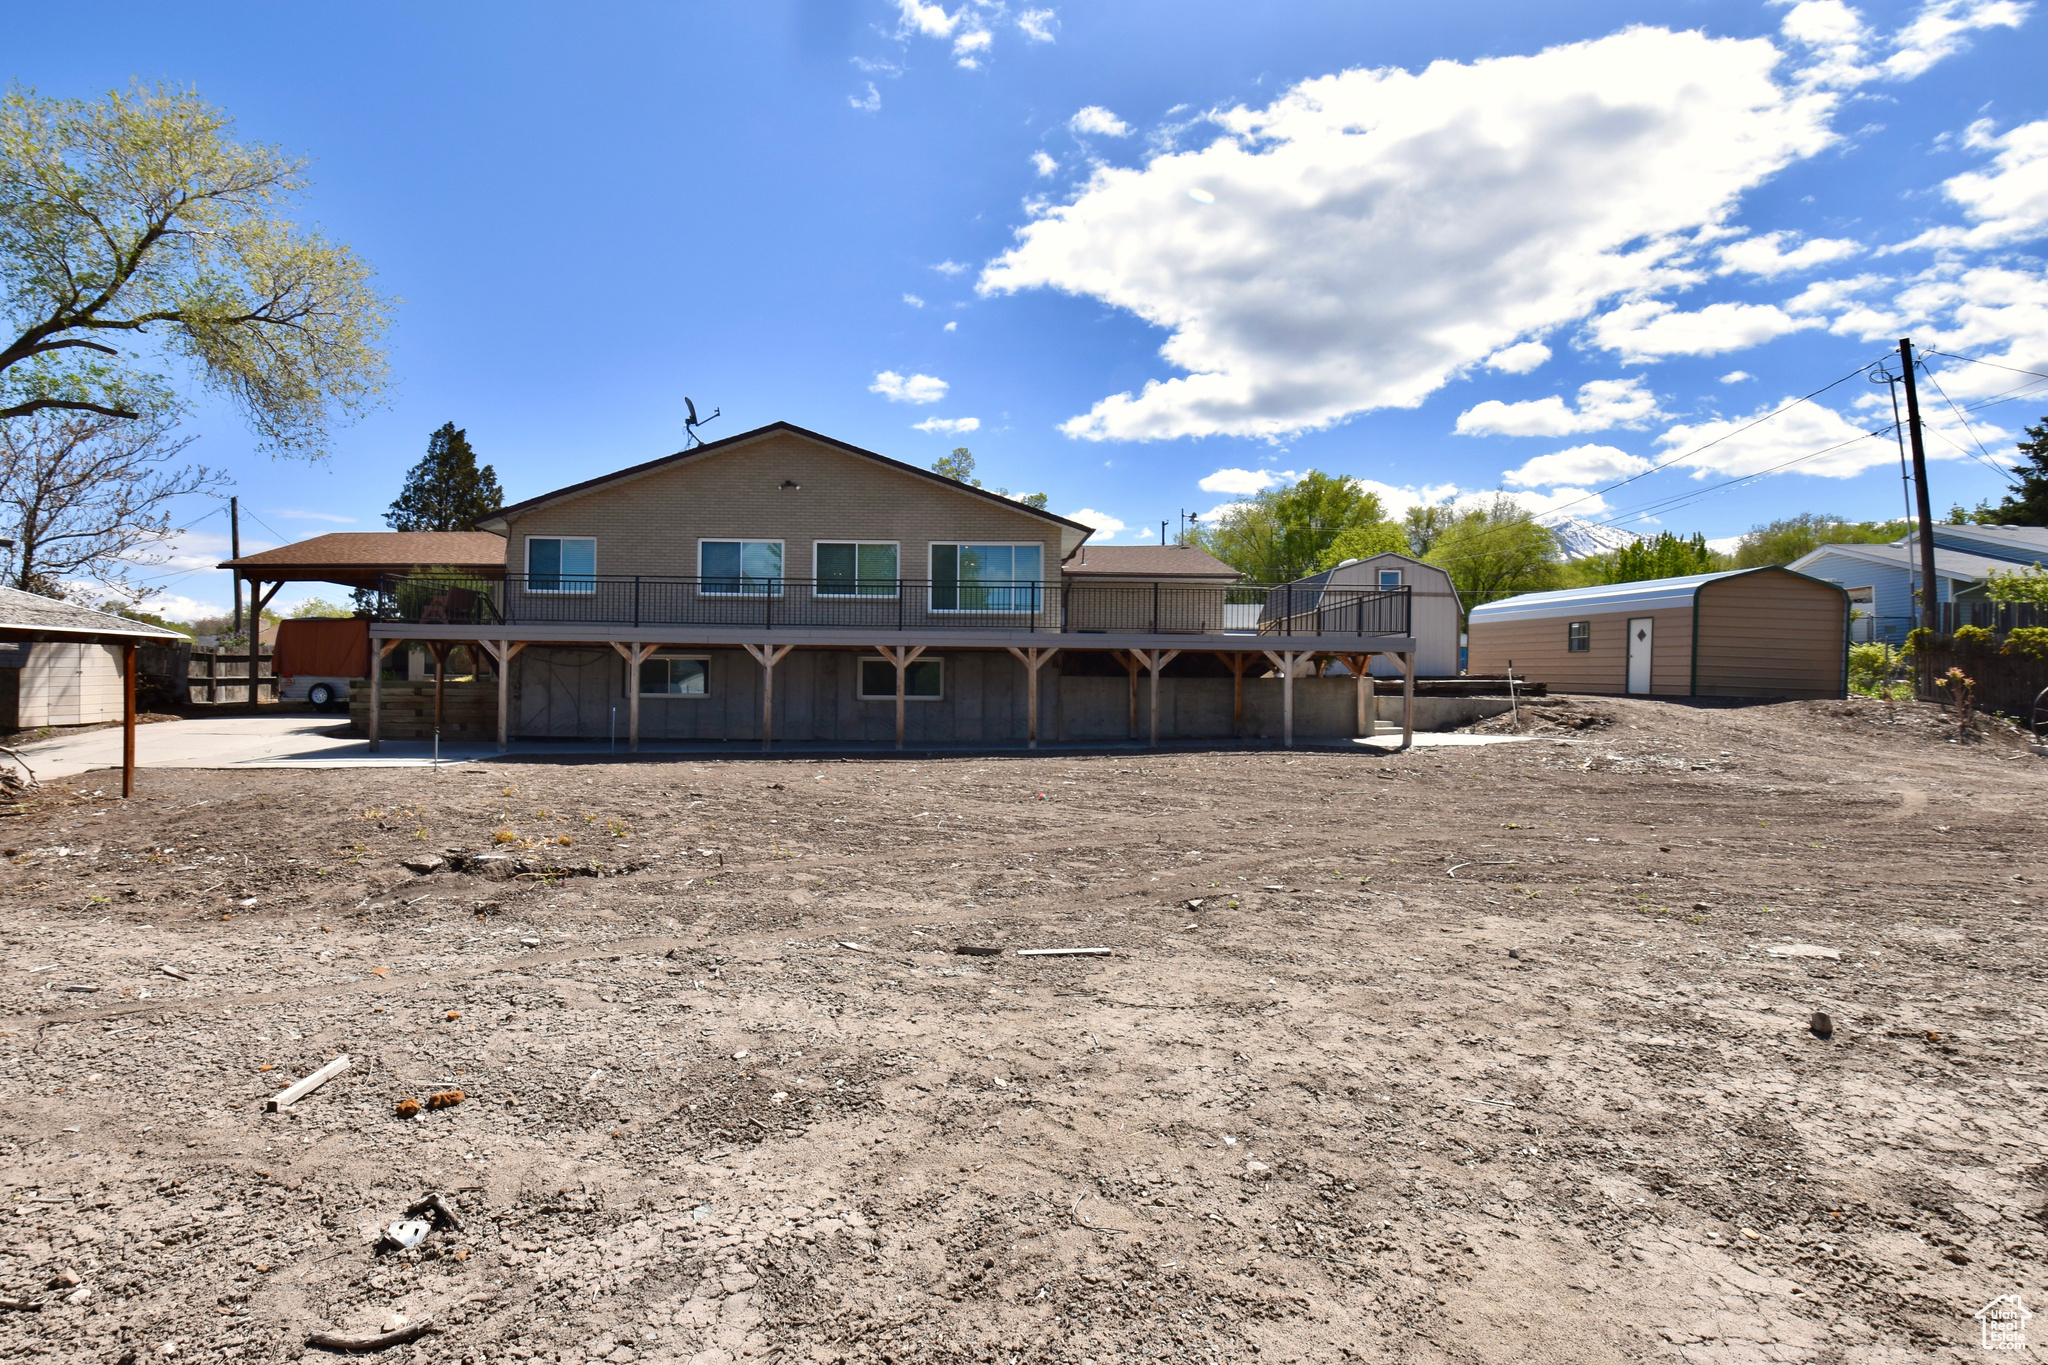 484 S 300 W, Payson, Utah 84651, 3 Bedrooms Bedrooms, 13 Rooms Rooms,2 BathroomsBathrooms,Residential,For sale,300,1995809